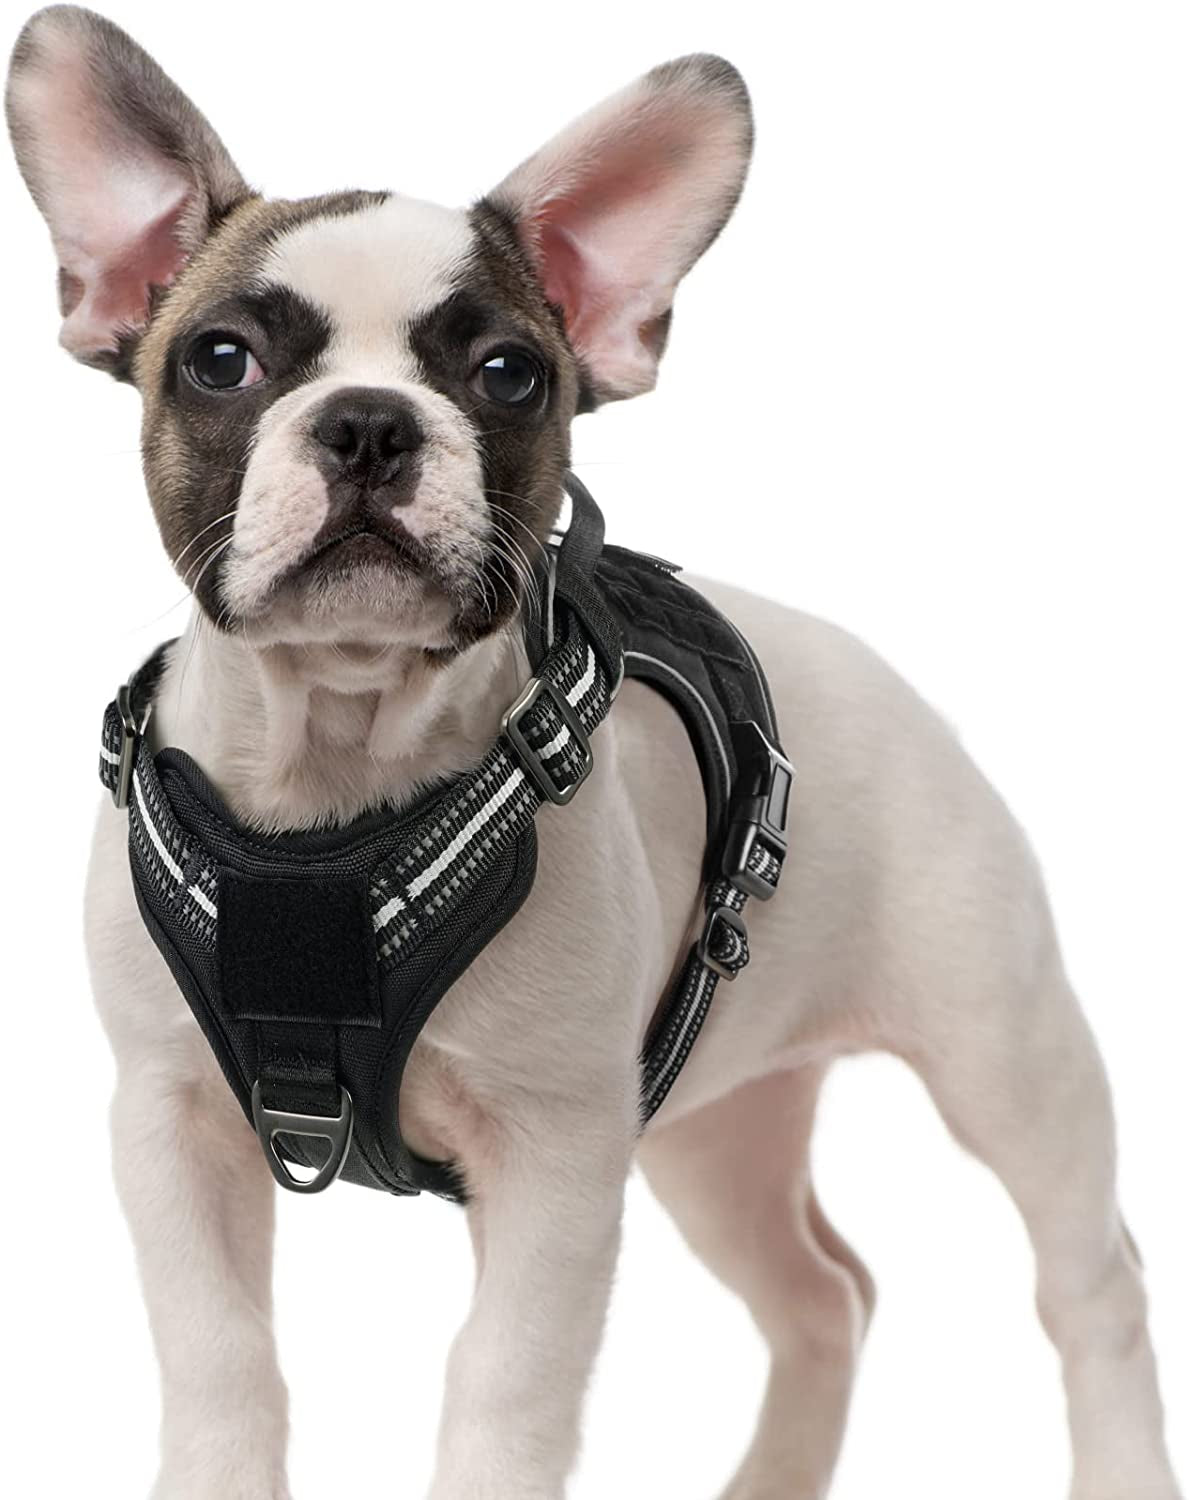 Rabbitgoo Tactical Dog Harness No Pull, Military Dog Vest Harness with Handle & Molle, Easy Control Service Dog Harness for Large Dogs Training Walking, Adjustable Reflective Pet Harness, Black, L Animals & Pet Supplies > Pet Supplies > Dog Supplies > Dog Apparel GLOBEGOU CO.,LTD Black Small 